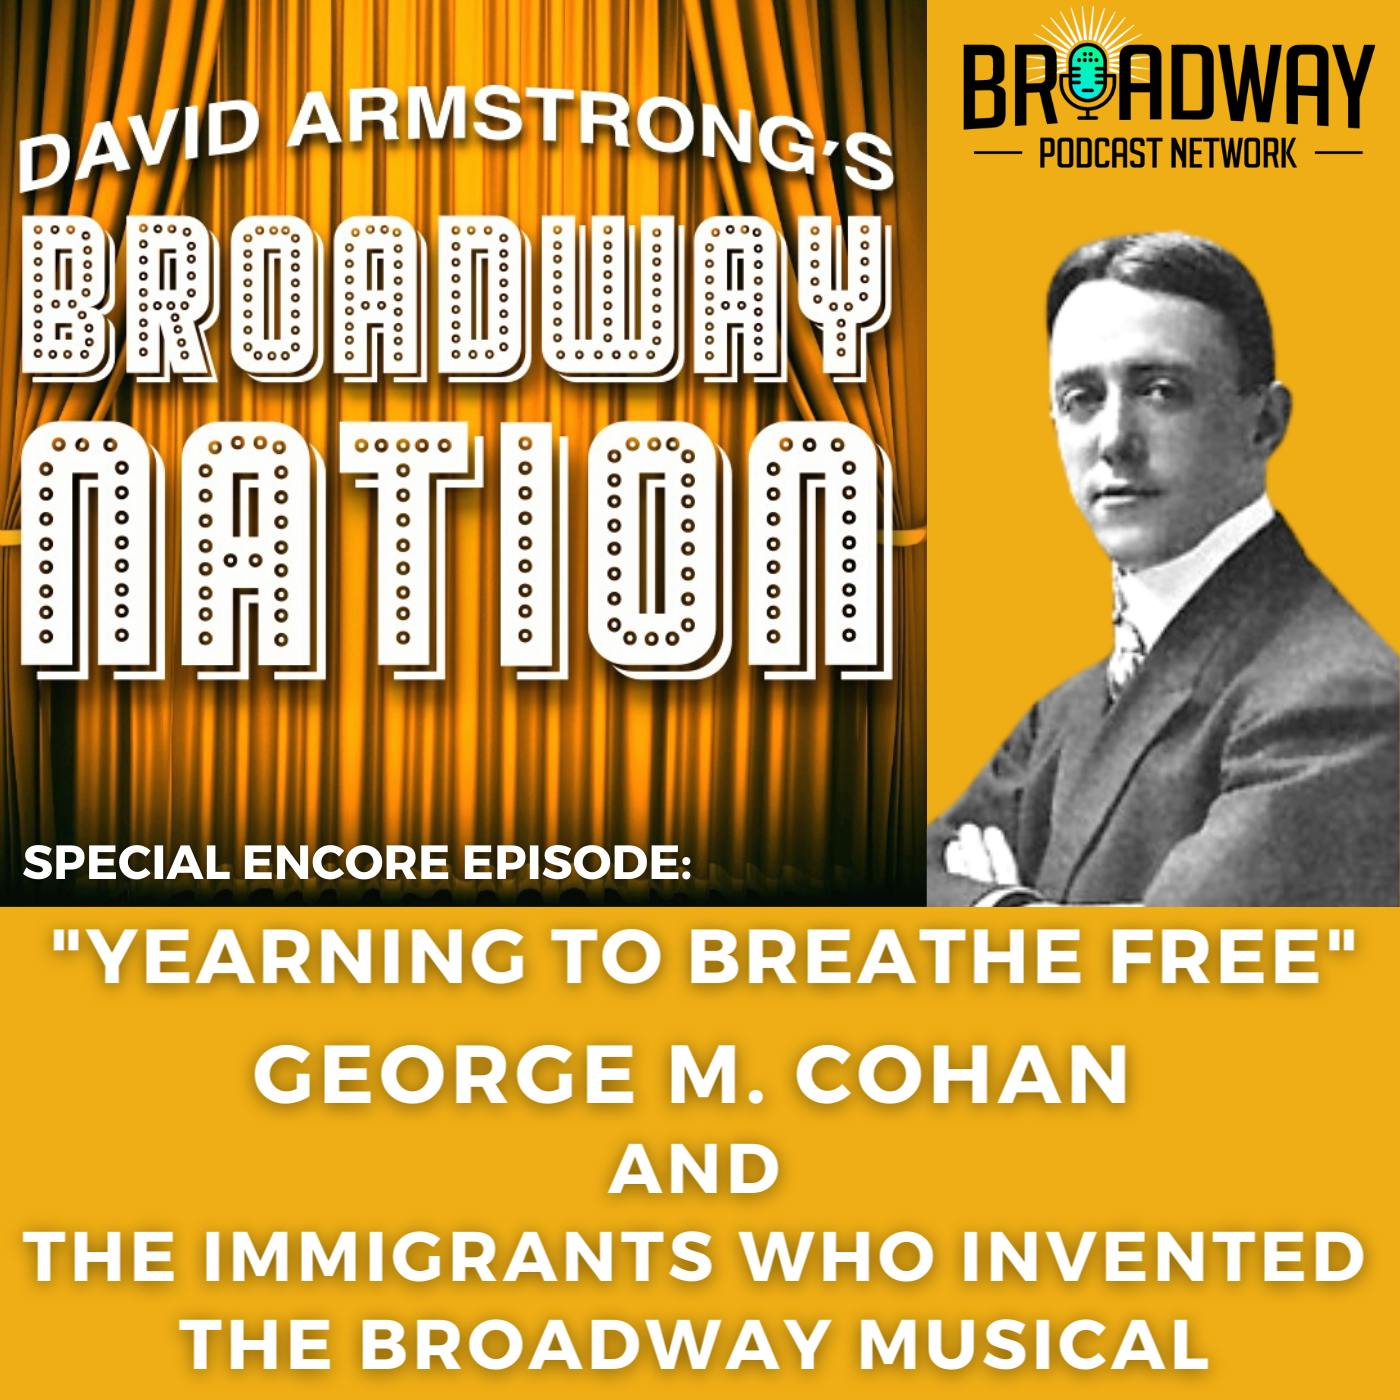 Encore Episode: "Yearning To Breathe Free": George M. Cohan & The Immigrants Who Invented The Broadway Musical Image